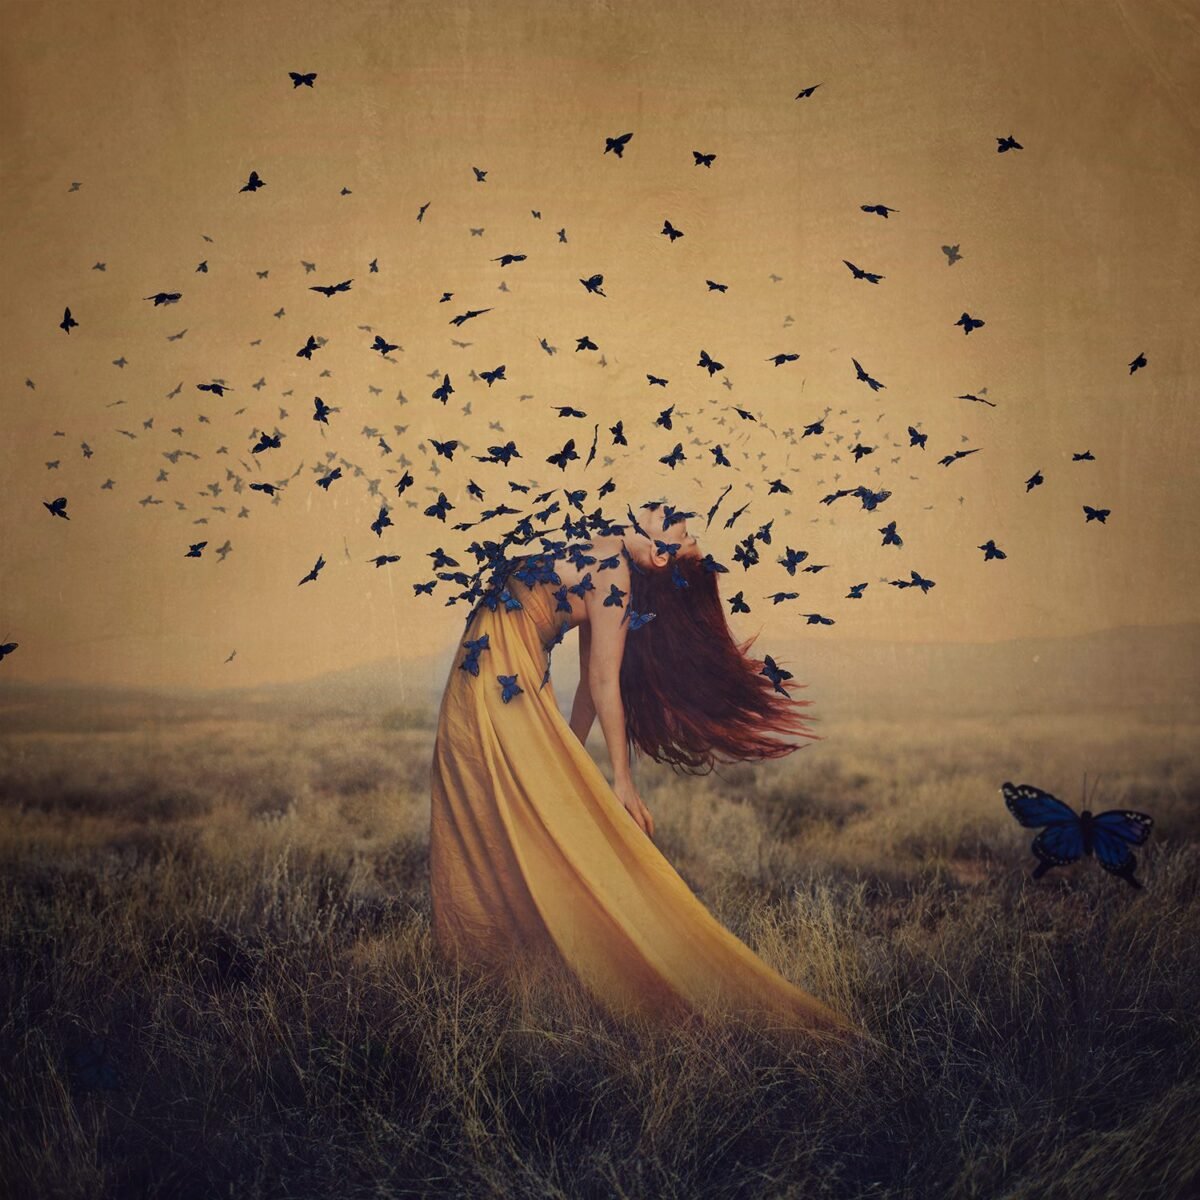 The Sound If Flying Souls by Brooke Shaden